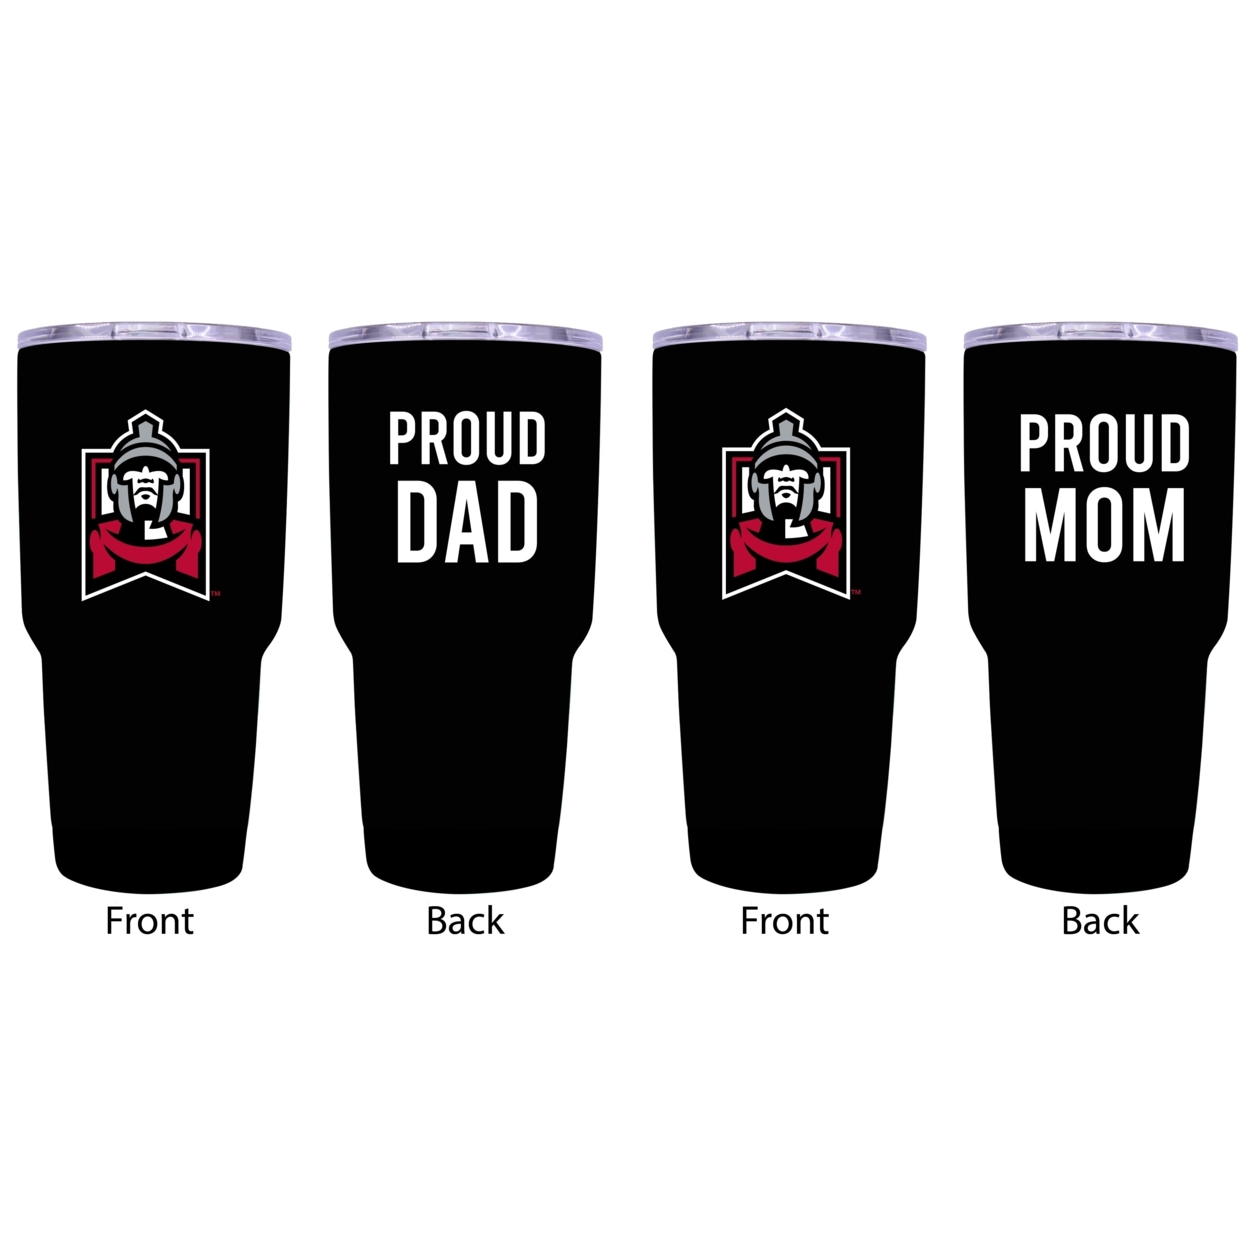 East Stroudsburg University Proud Mom And Dad 24 Oz Insulated Stainless Steel Tumblers 2 Pack Black.